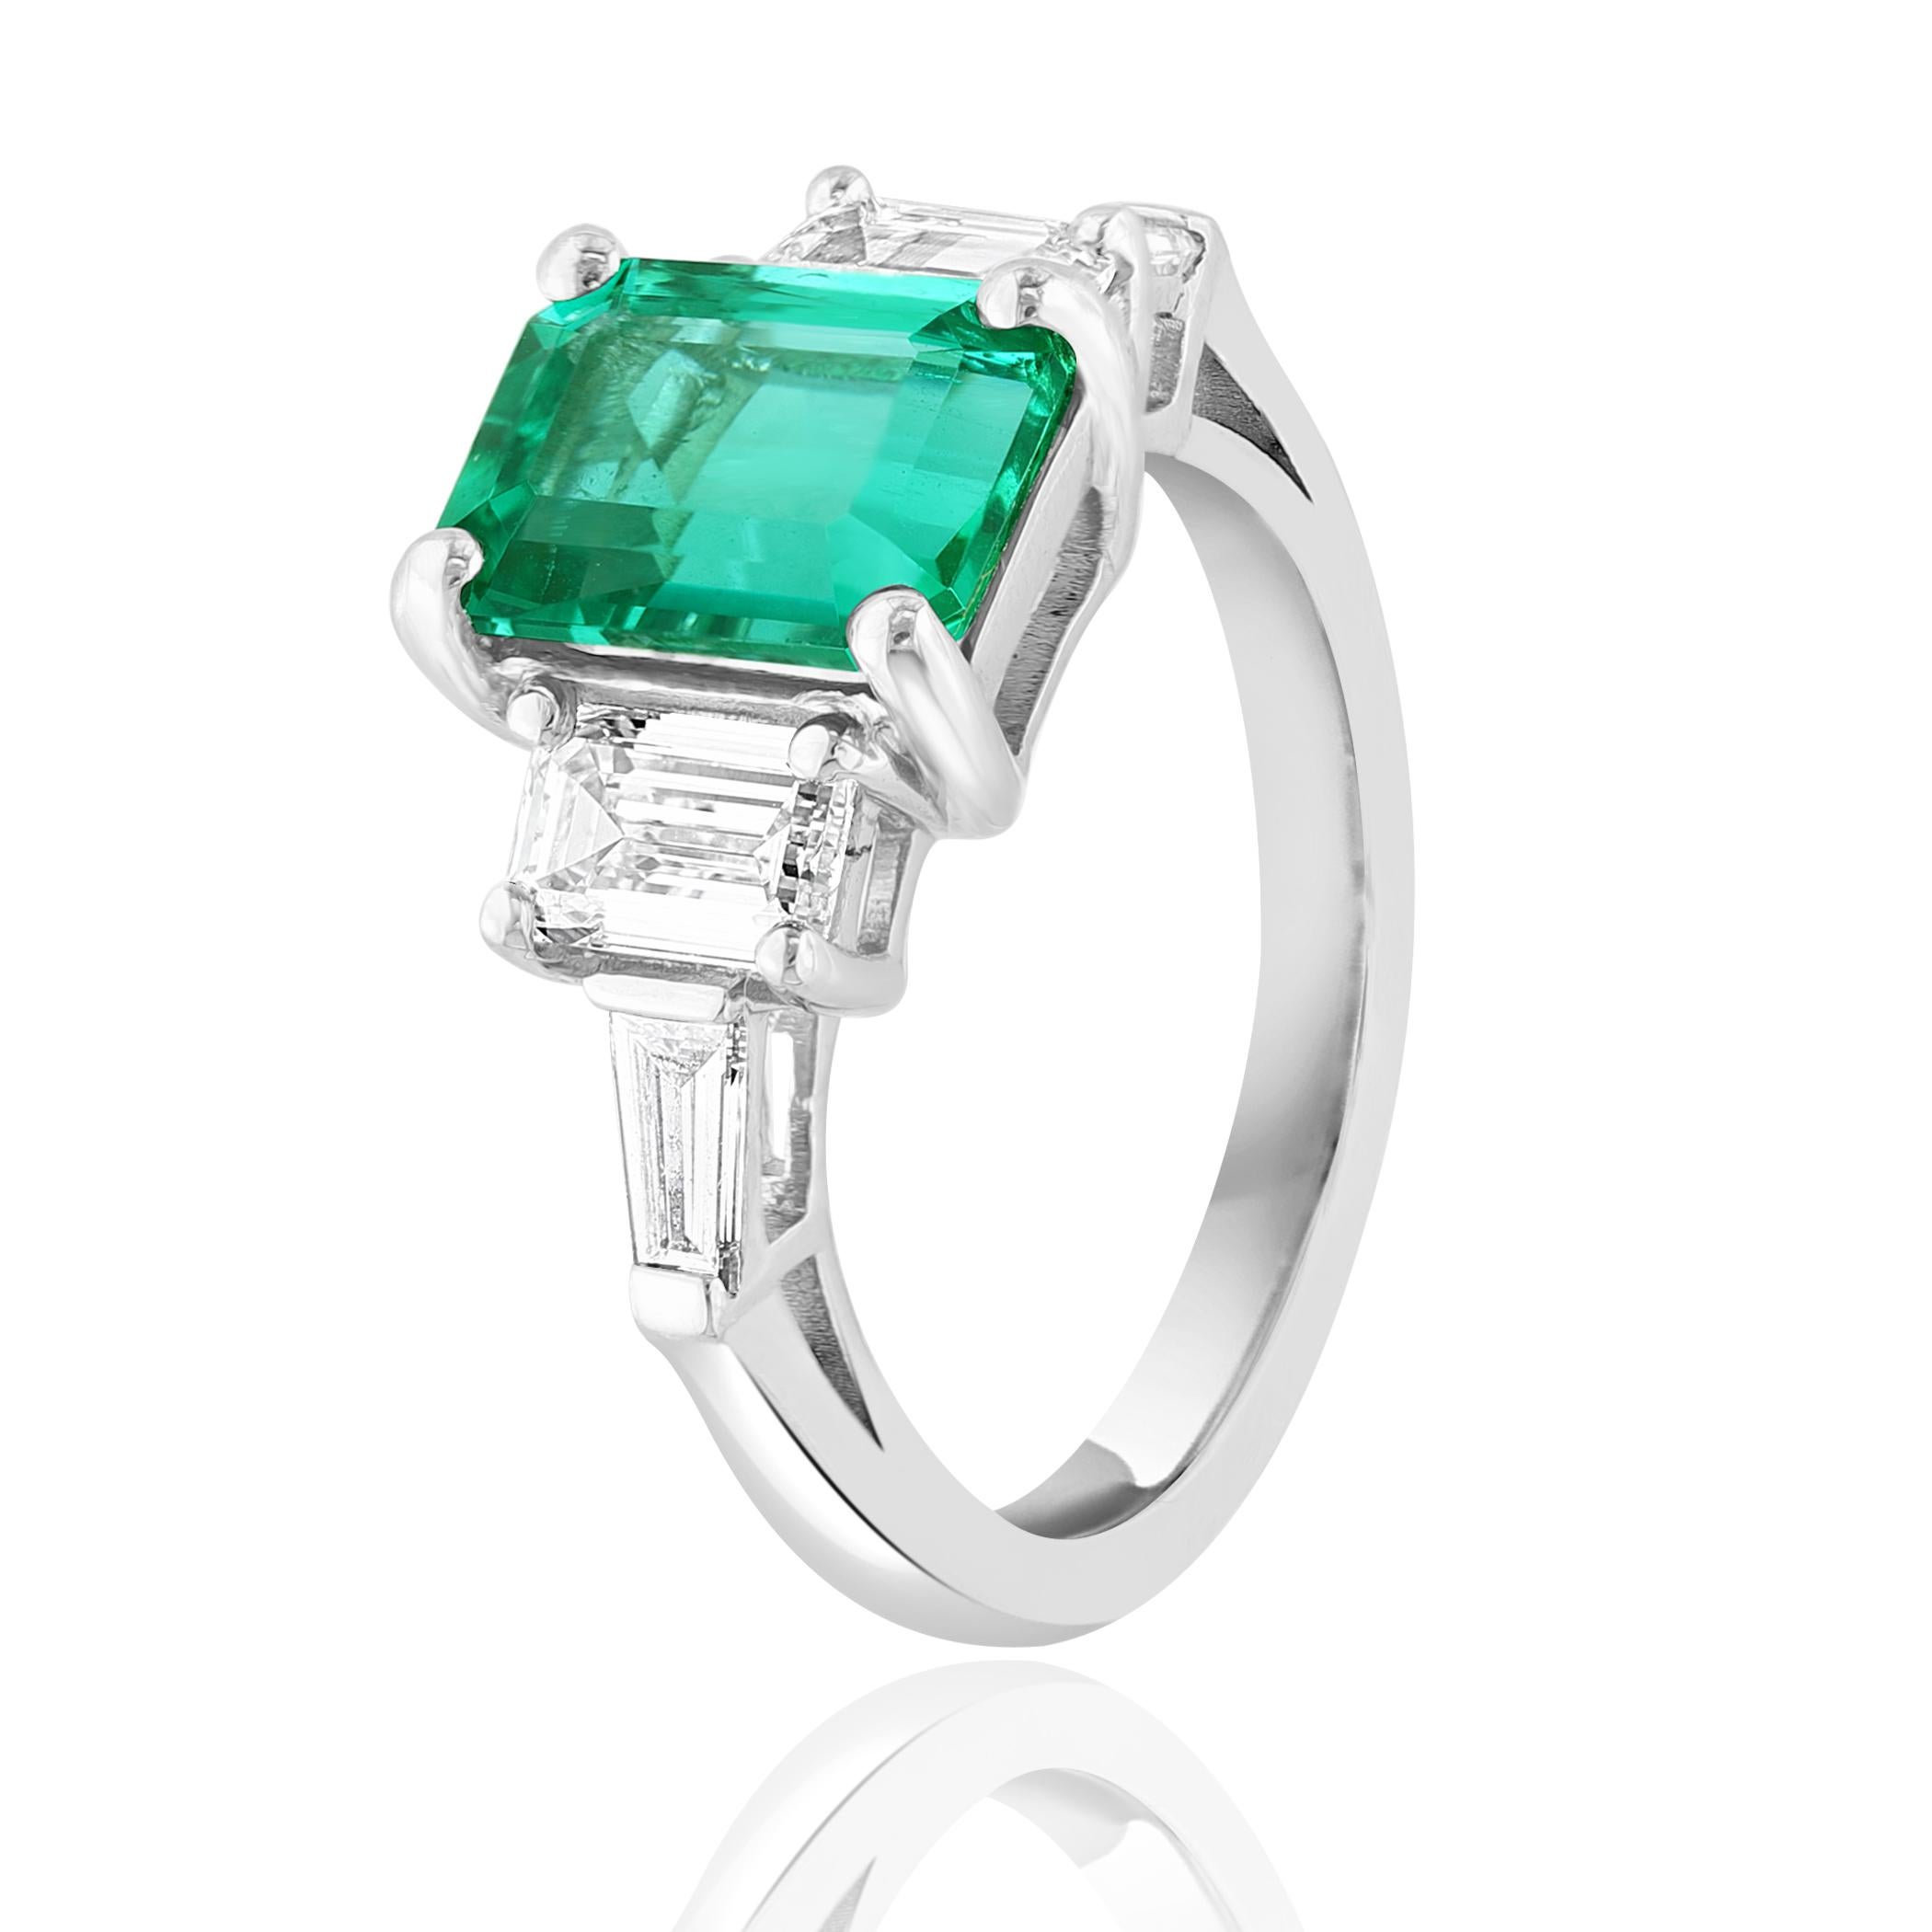 Showcasing color-rich 2.73 carat emerald. Two perfectly matched emerald cut diamonds weighing 1.03 carat elegantly flank the center emerald cut emerald for a very classy and sophisticated piece. Additional 2 bullets cut diamonds weigh 0.20-carat